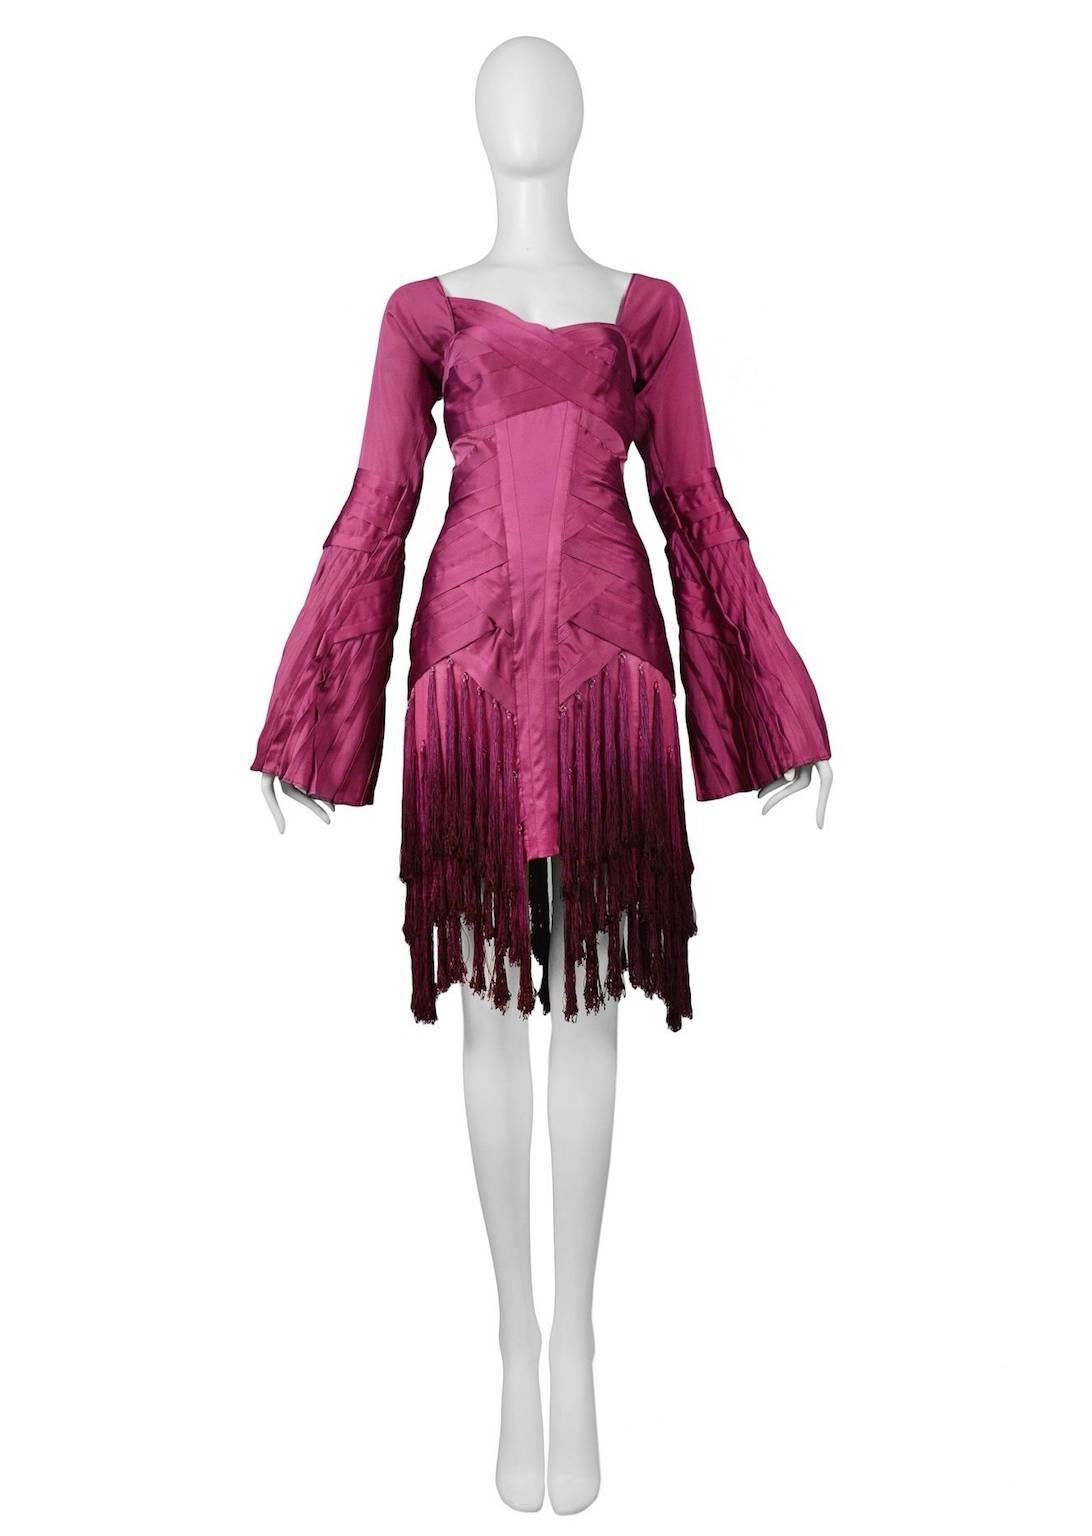 Iconic vintage Tom Ford for Gucci fuchsia silk long sleeve evening dress featuring intricate woven pleating at torso and bust and three tiers of tassels at the skirt. Runway piece from the Fall/Winter 2004 Collection.